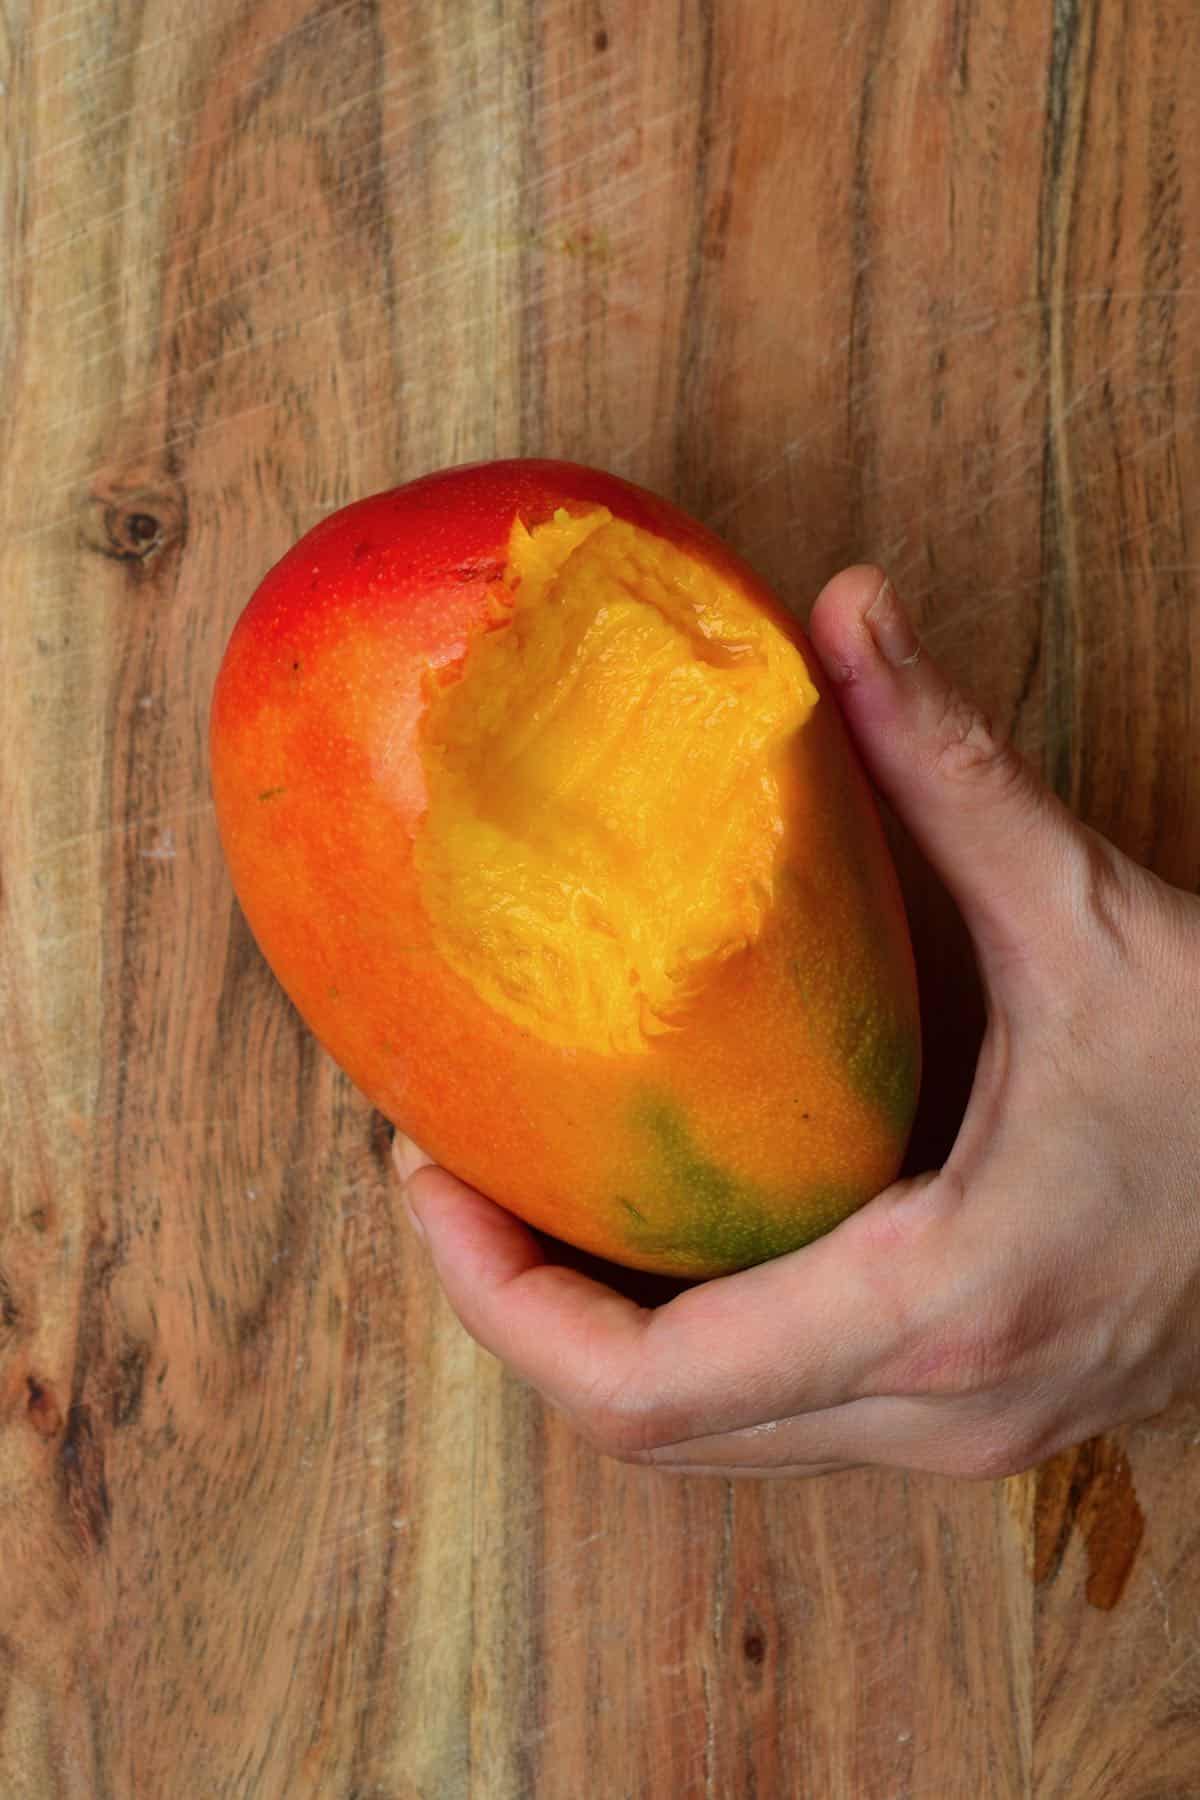 A mango with a bite in it